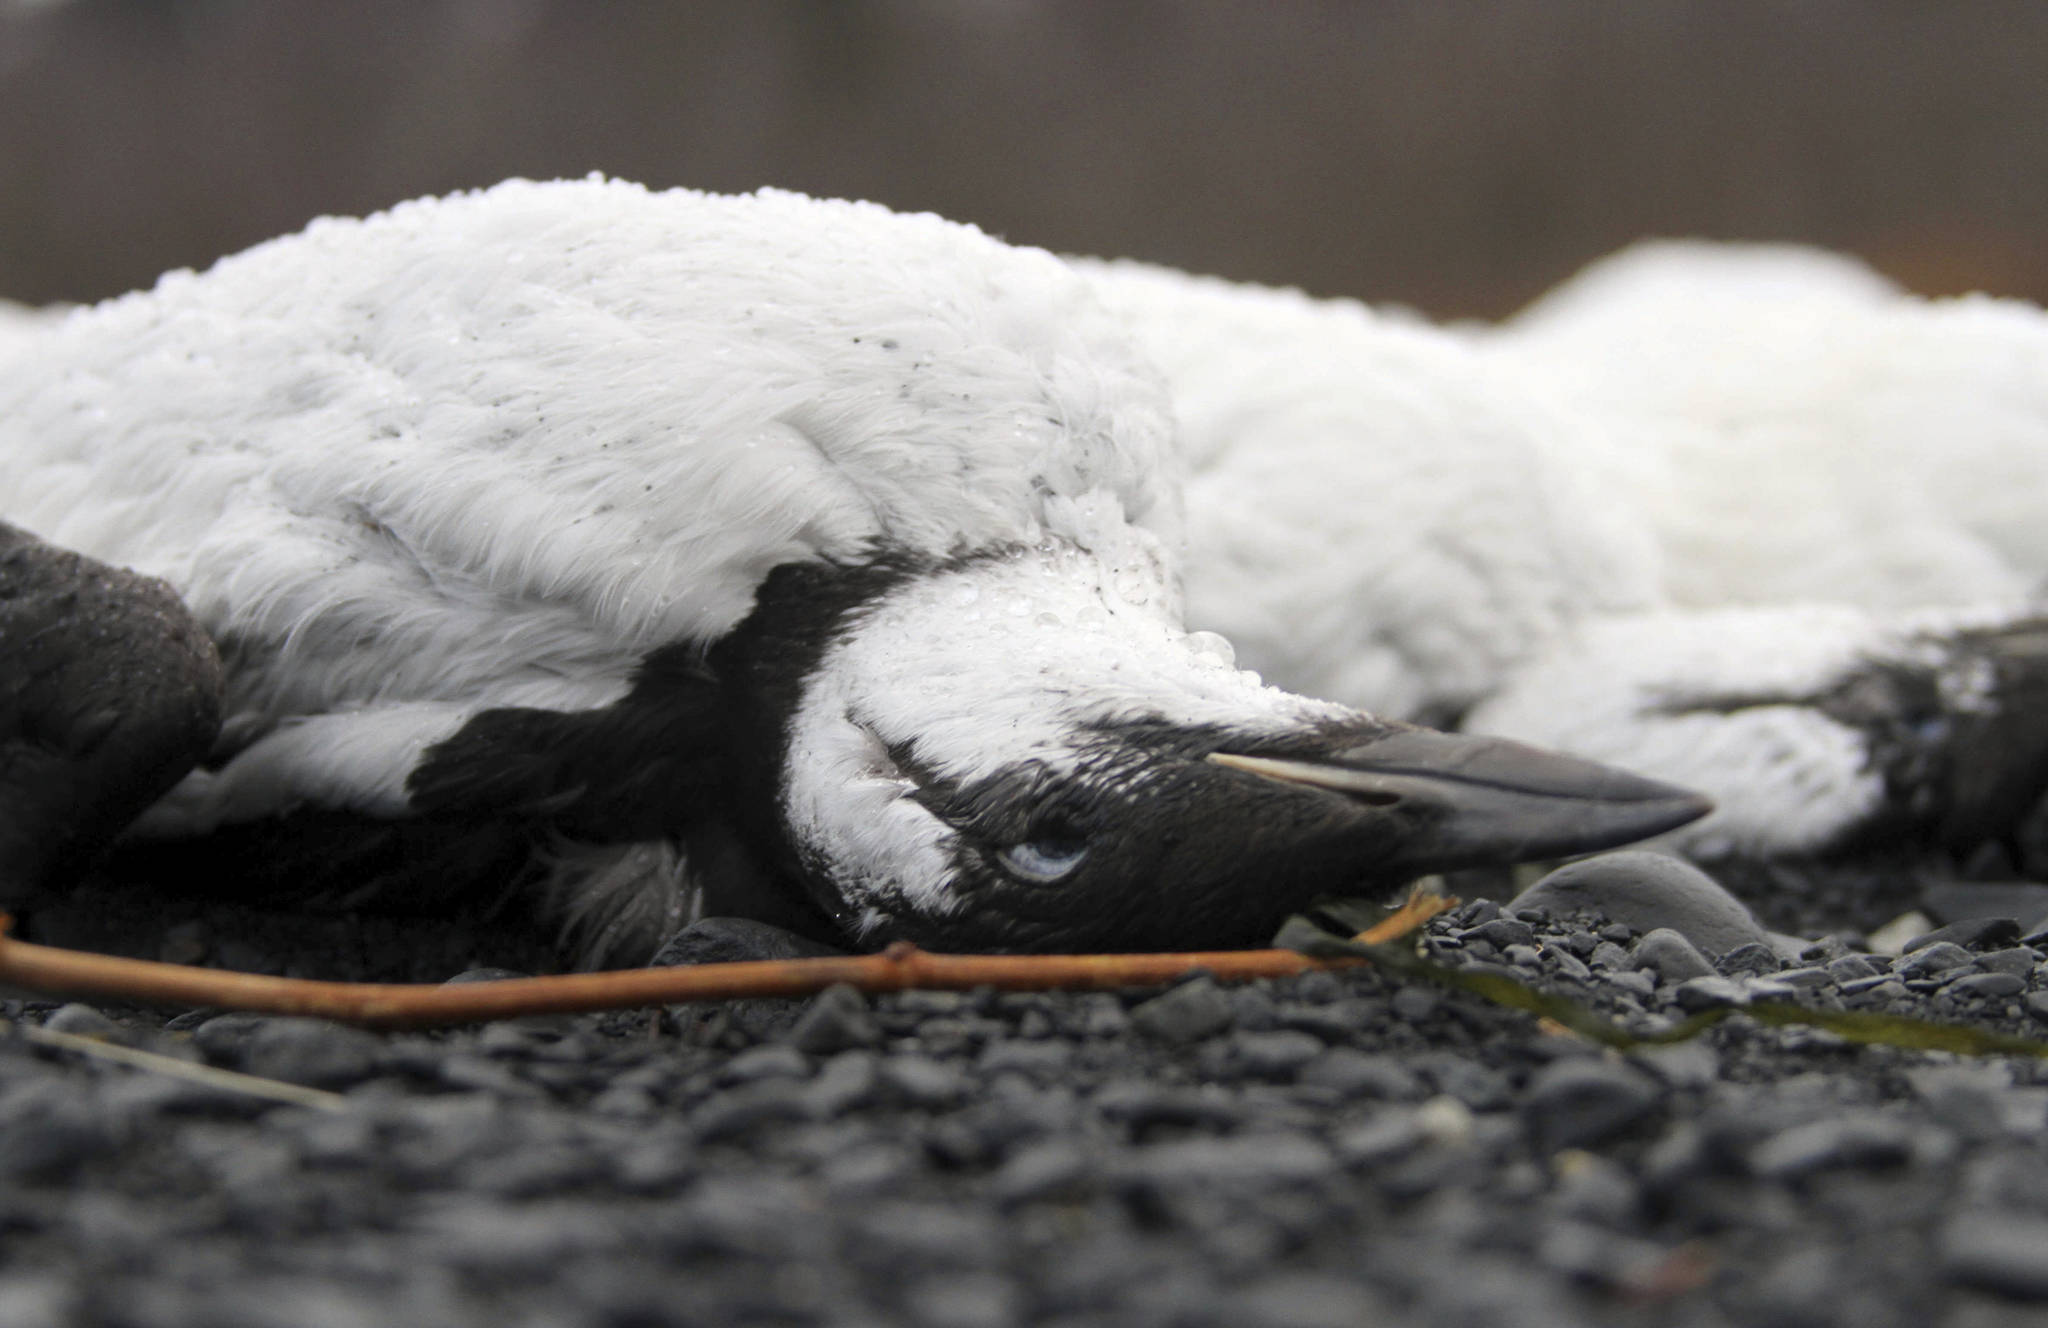 Seabird die-offs may be connected to warming ocean